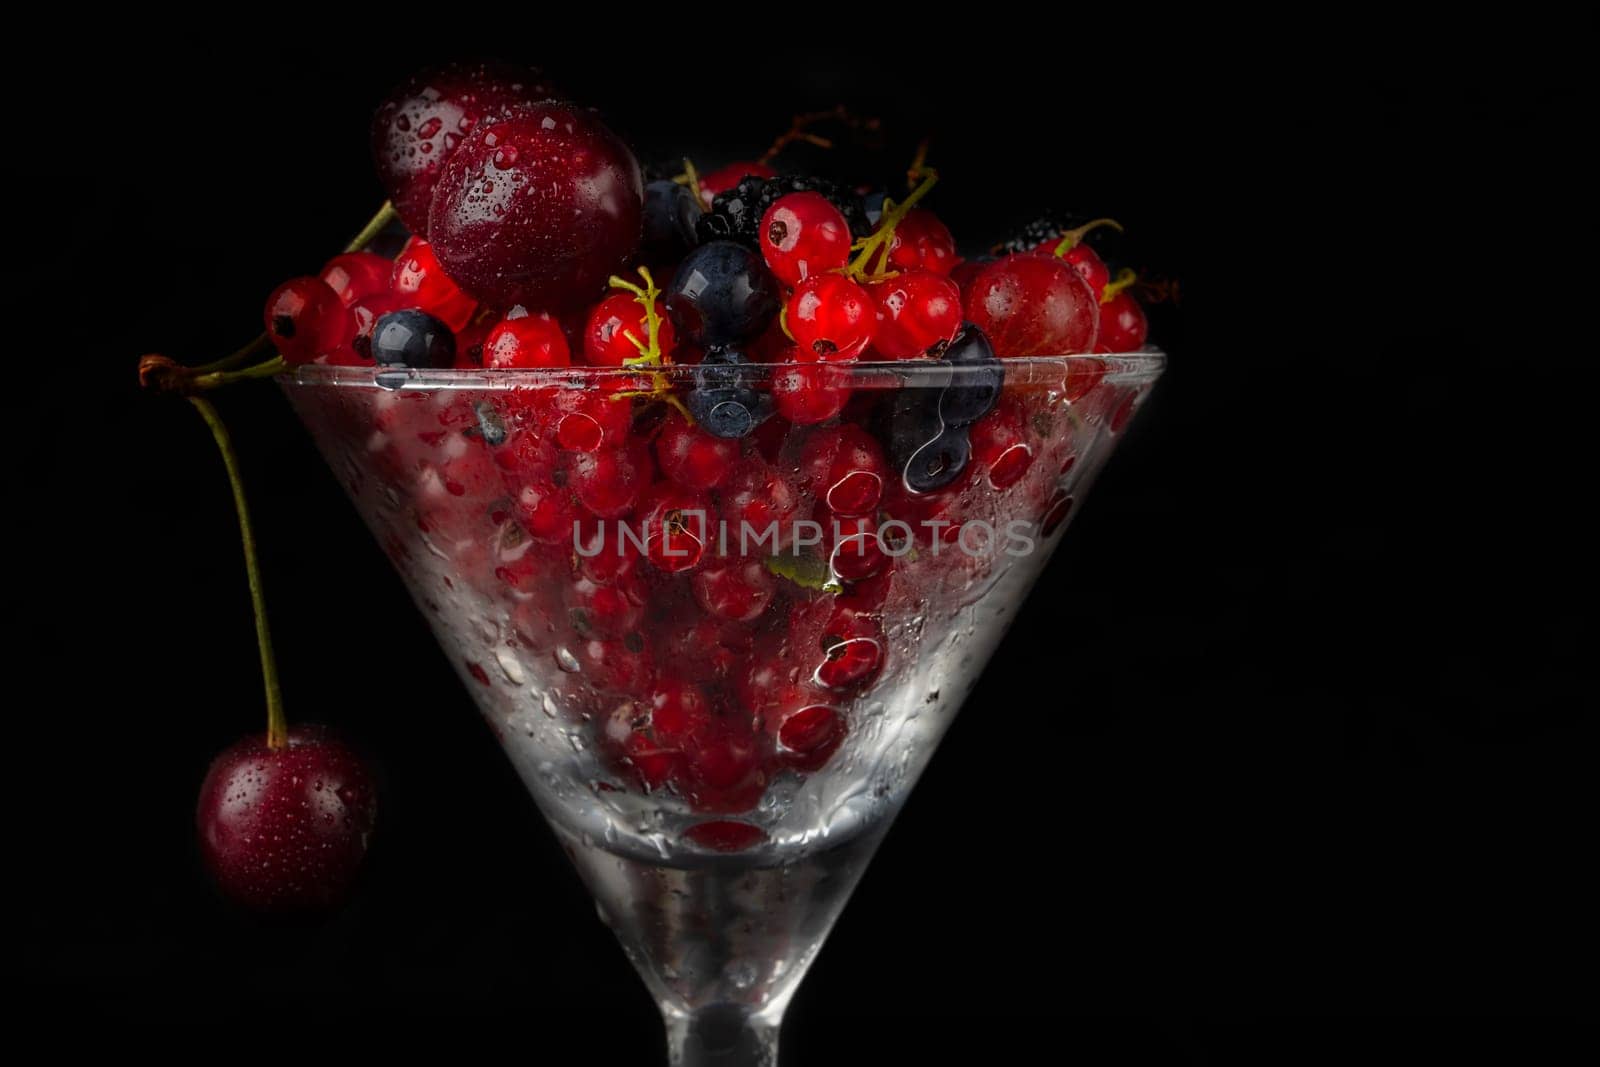 Summer berries in a glass glass on a dark background close-up. by Sviatlana